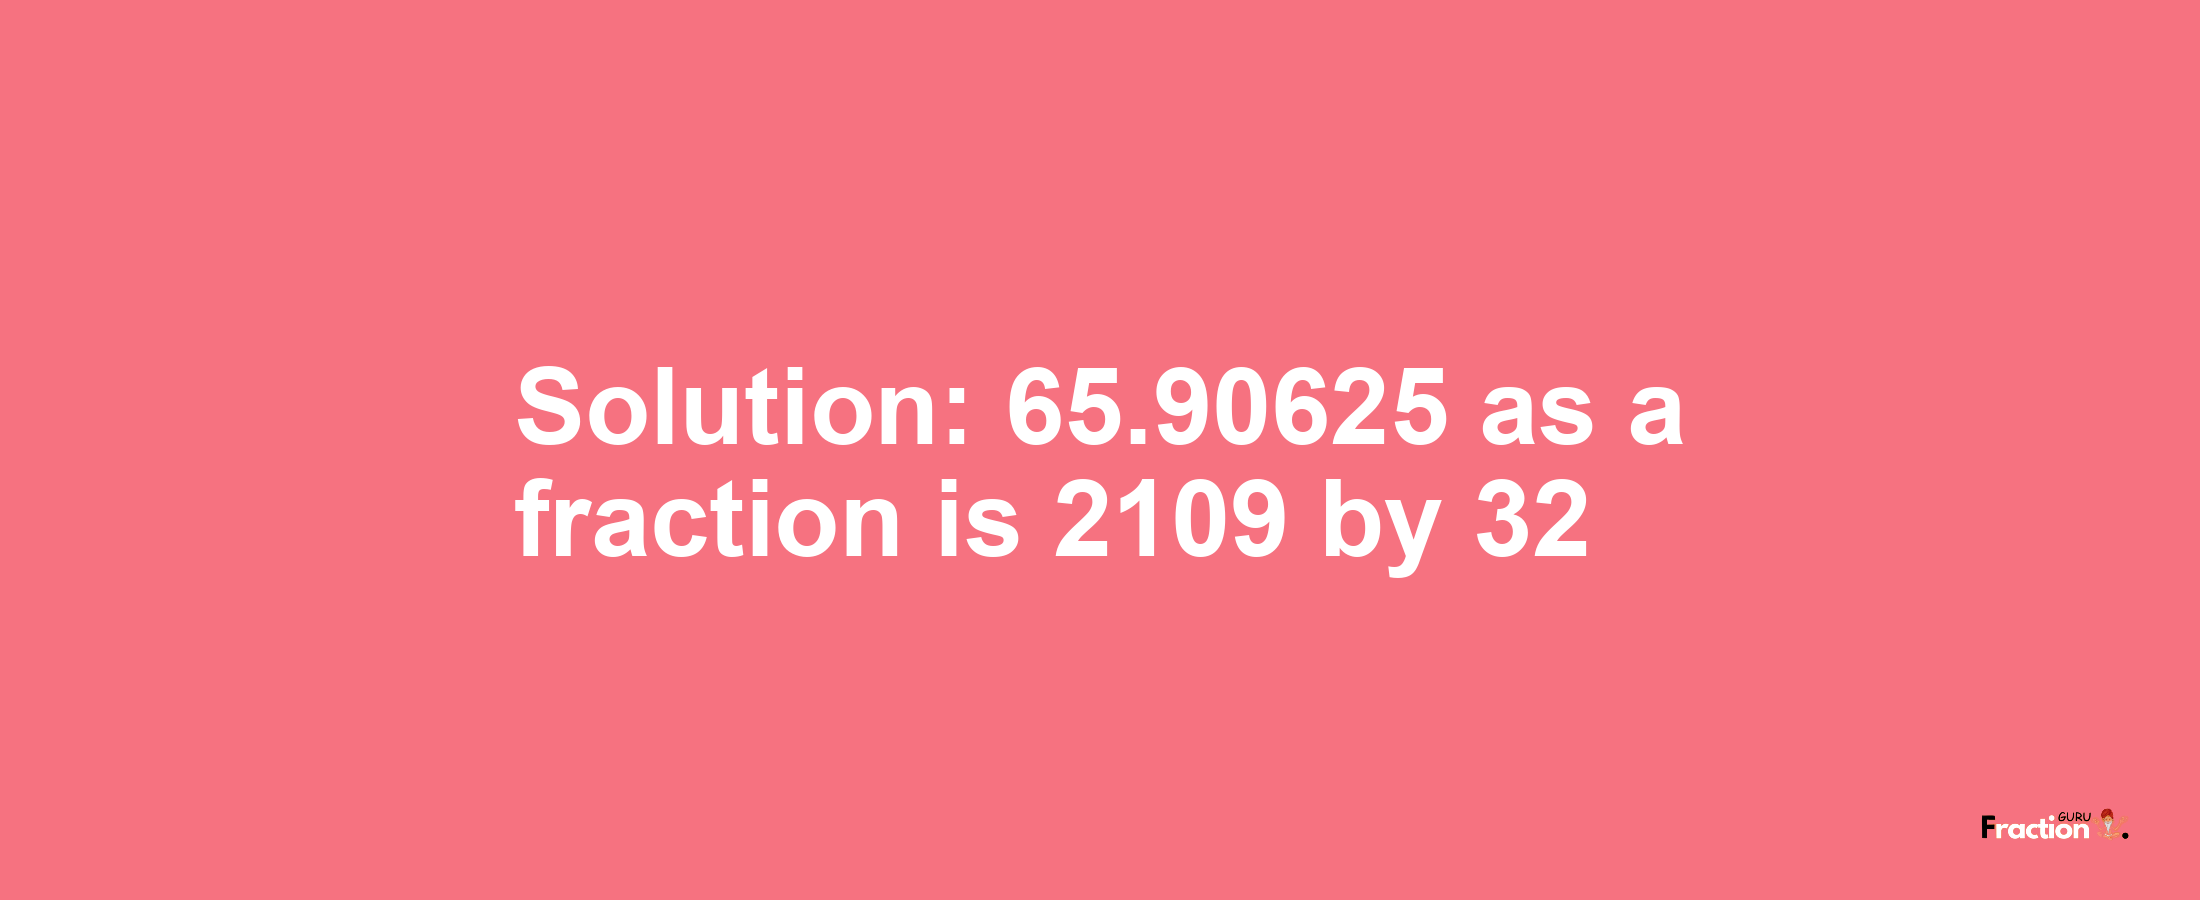 Solution:65.90625 as a fraction is 2109/32